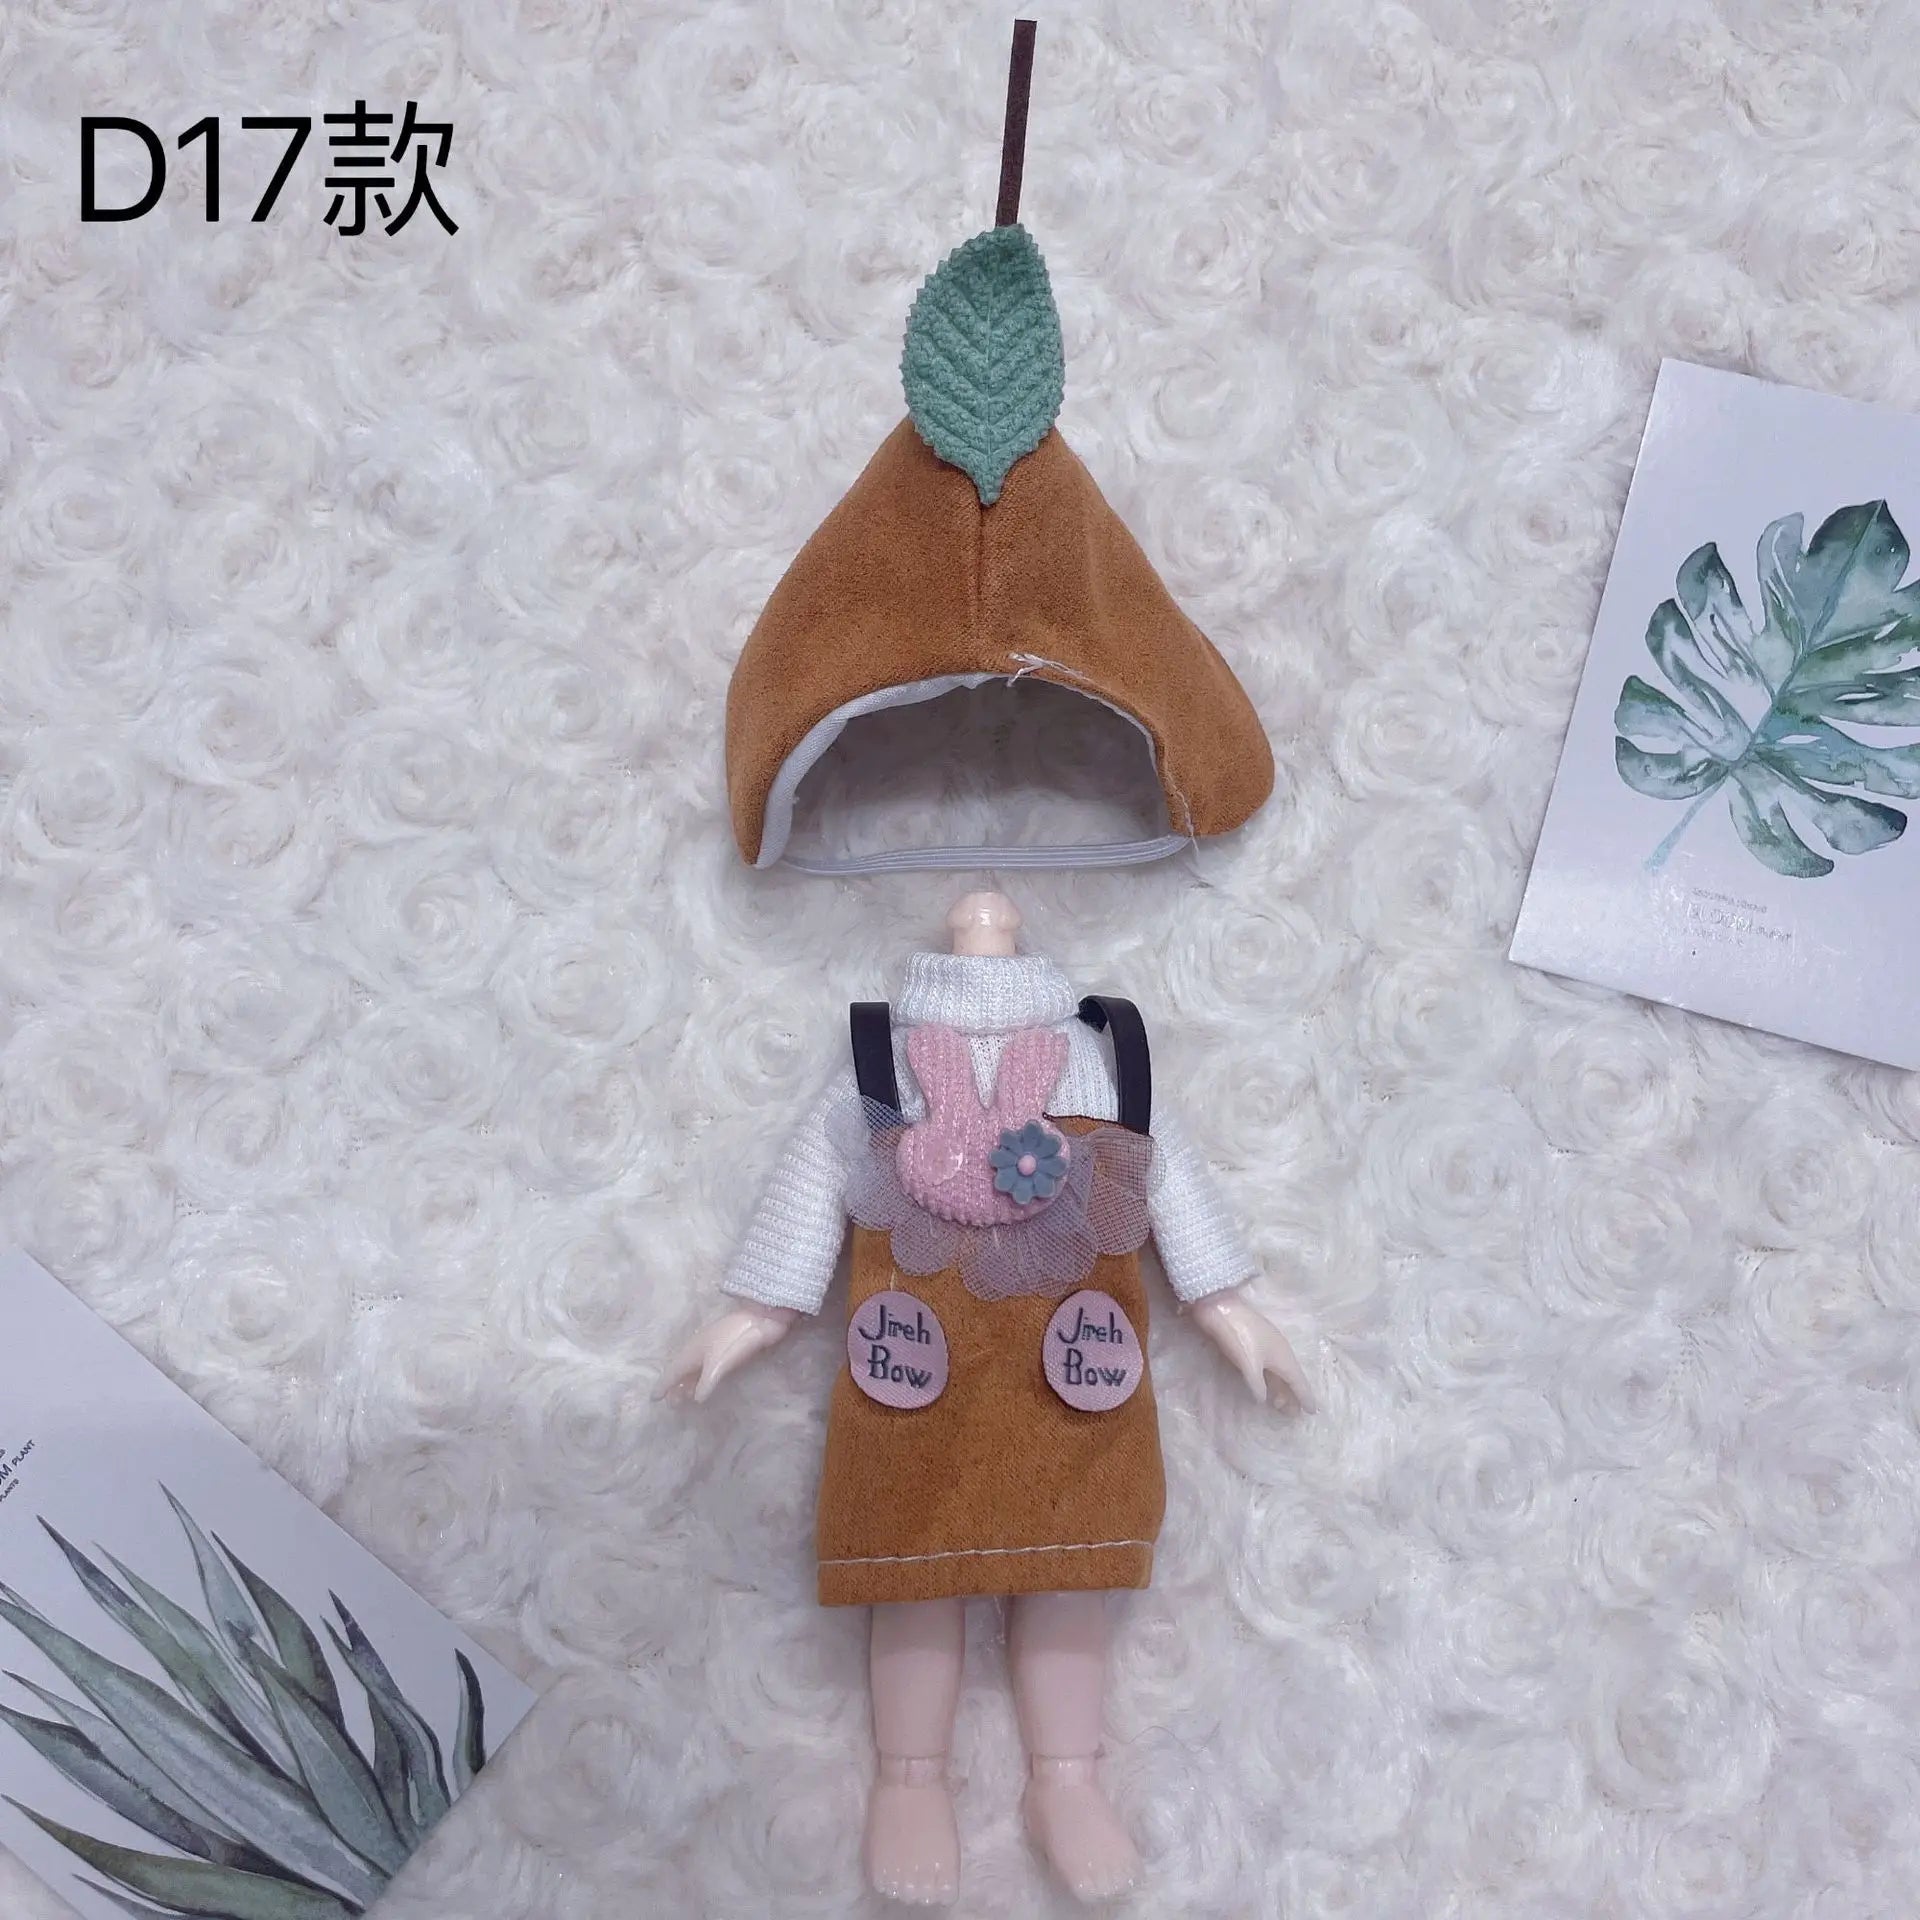 16cm Bjd Doll Clothes High-end Dress Up Can Dress Up Fashion Doll Clothes Skirt Suit Best Gifts for Children DIY Girls Toys